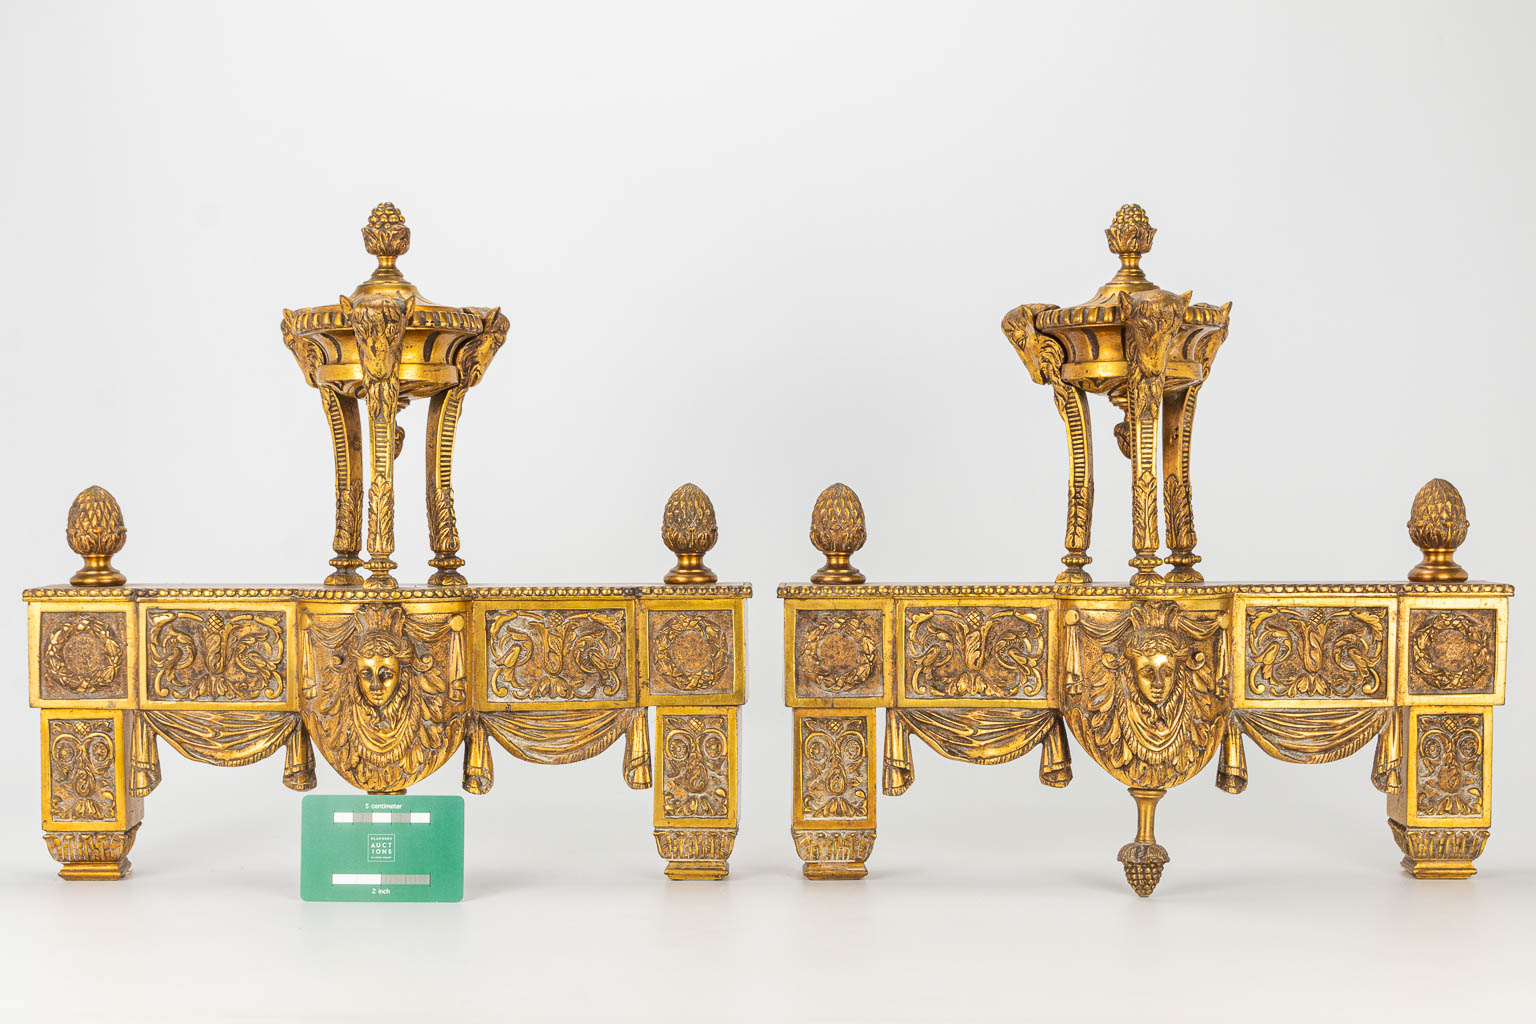 A pair of fireplace andirons made of bronze in Louis XVI style.